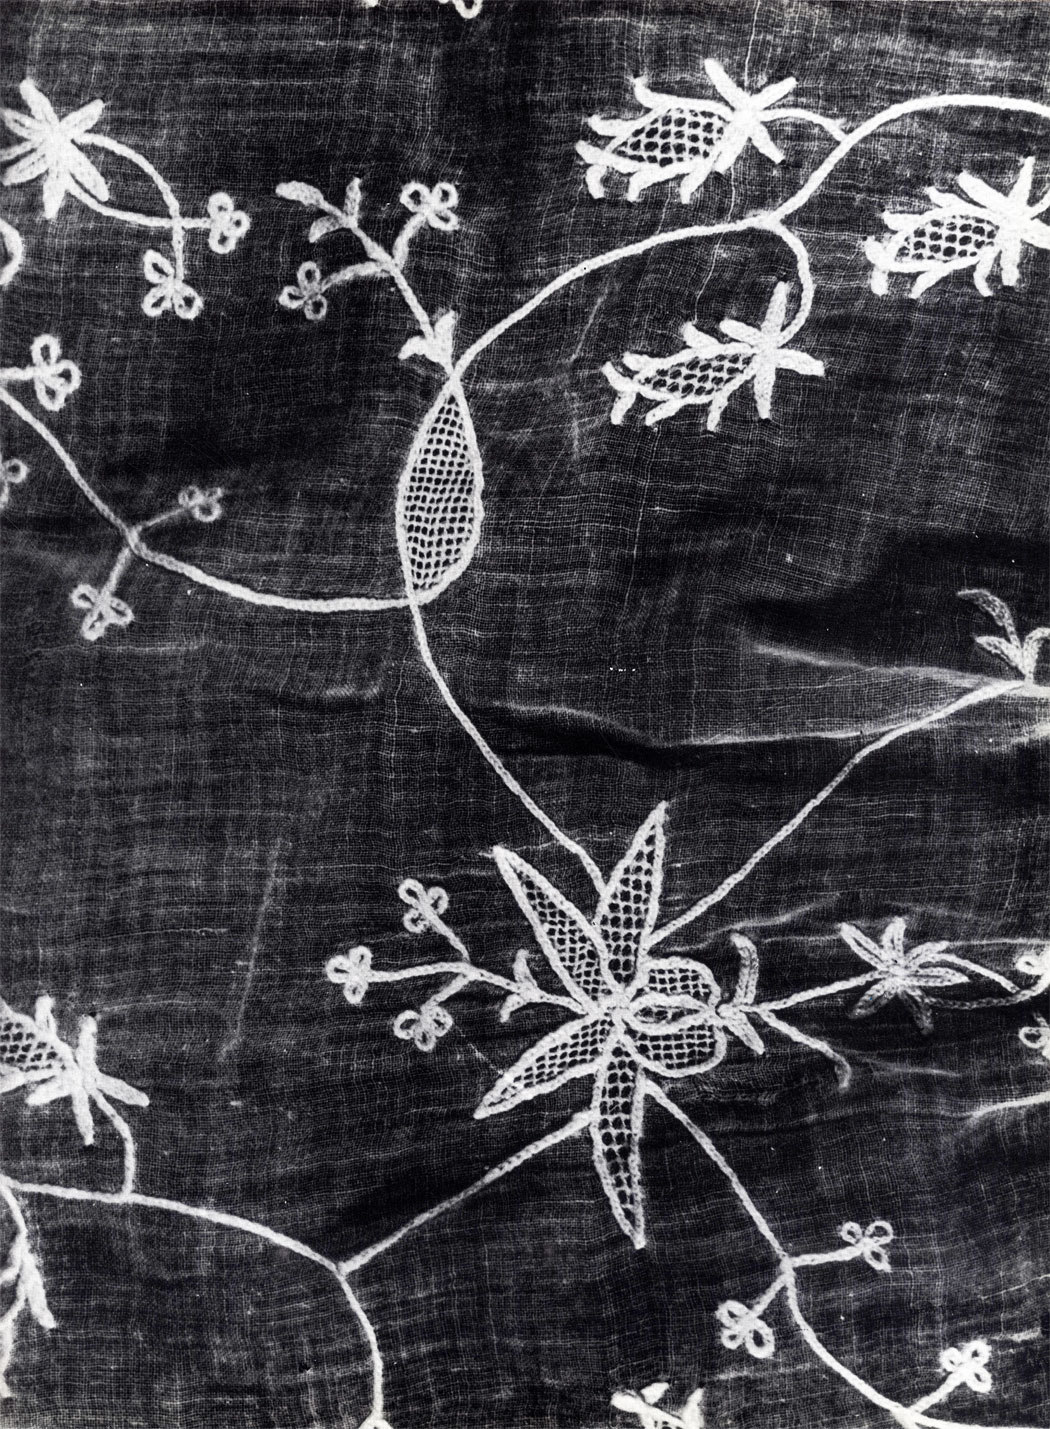 Detail of a bedspread. Late 18th - early 19th centuries. RT-14683